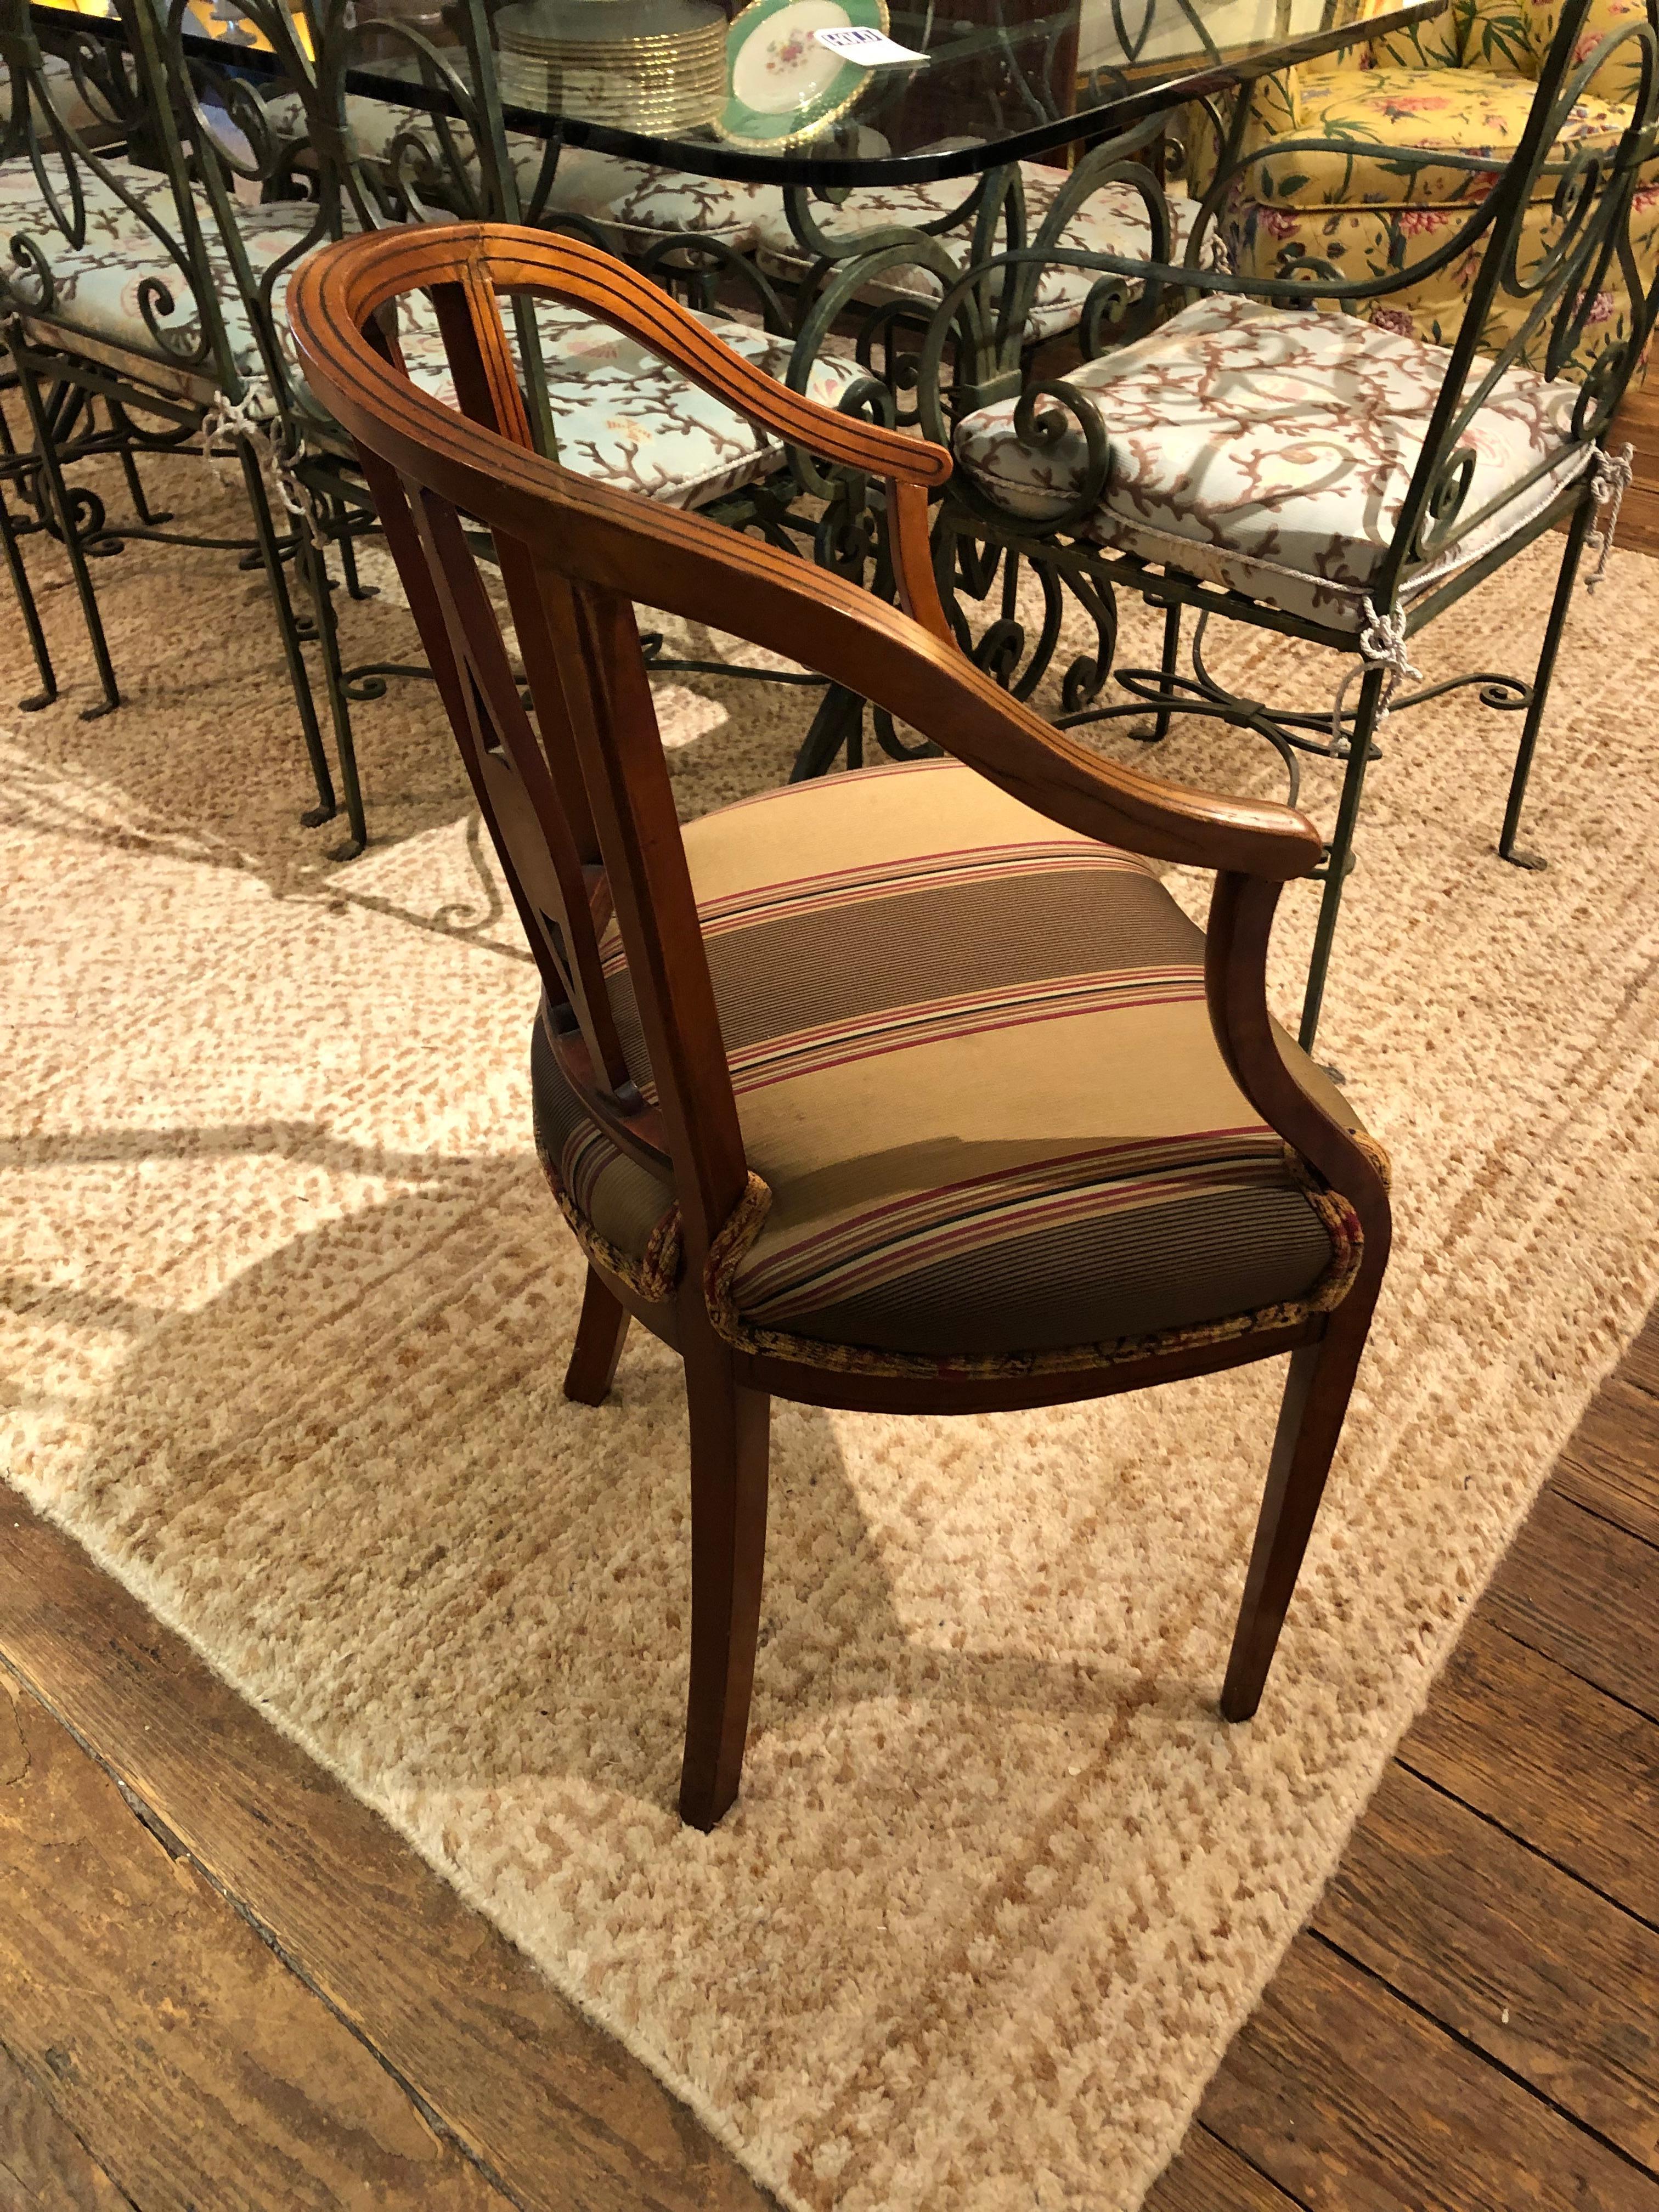 Upholstery Lovely Curved French Fruitwood Inlaid Salon or Desk Chair For Sale